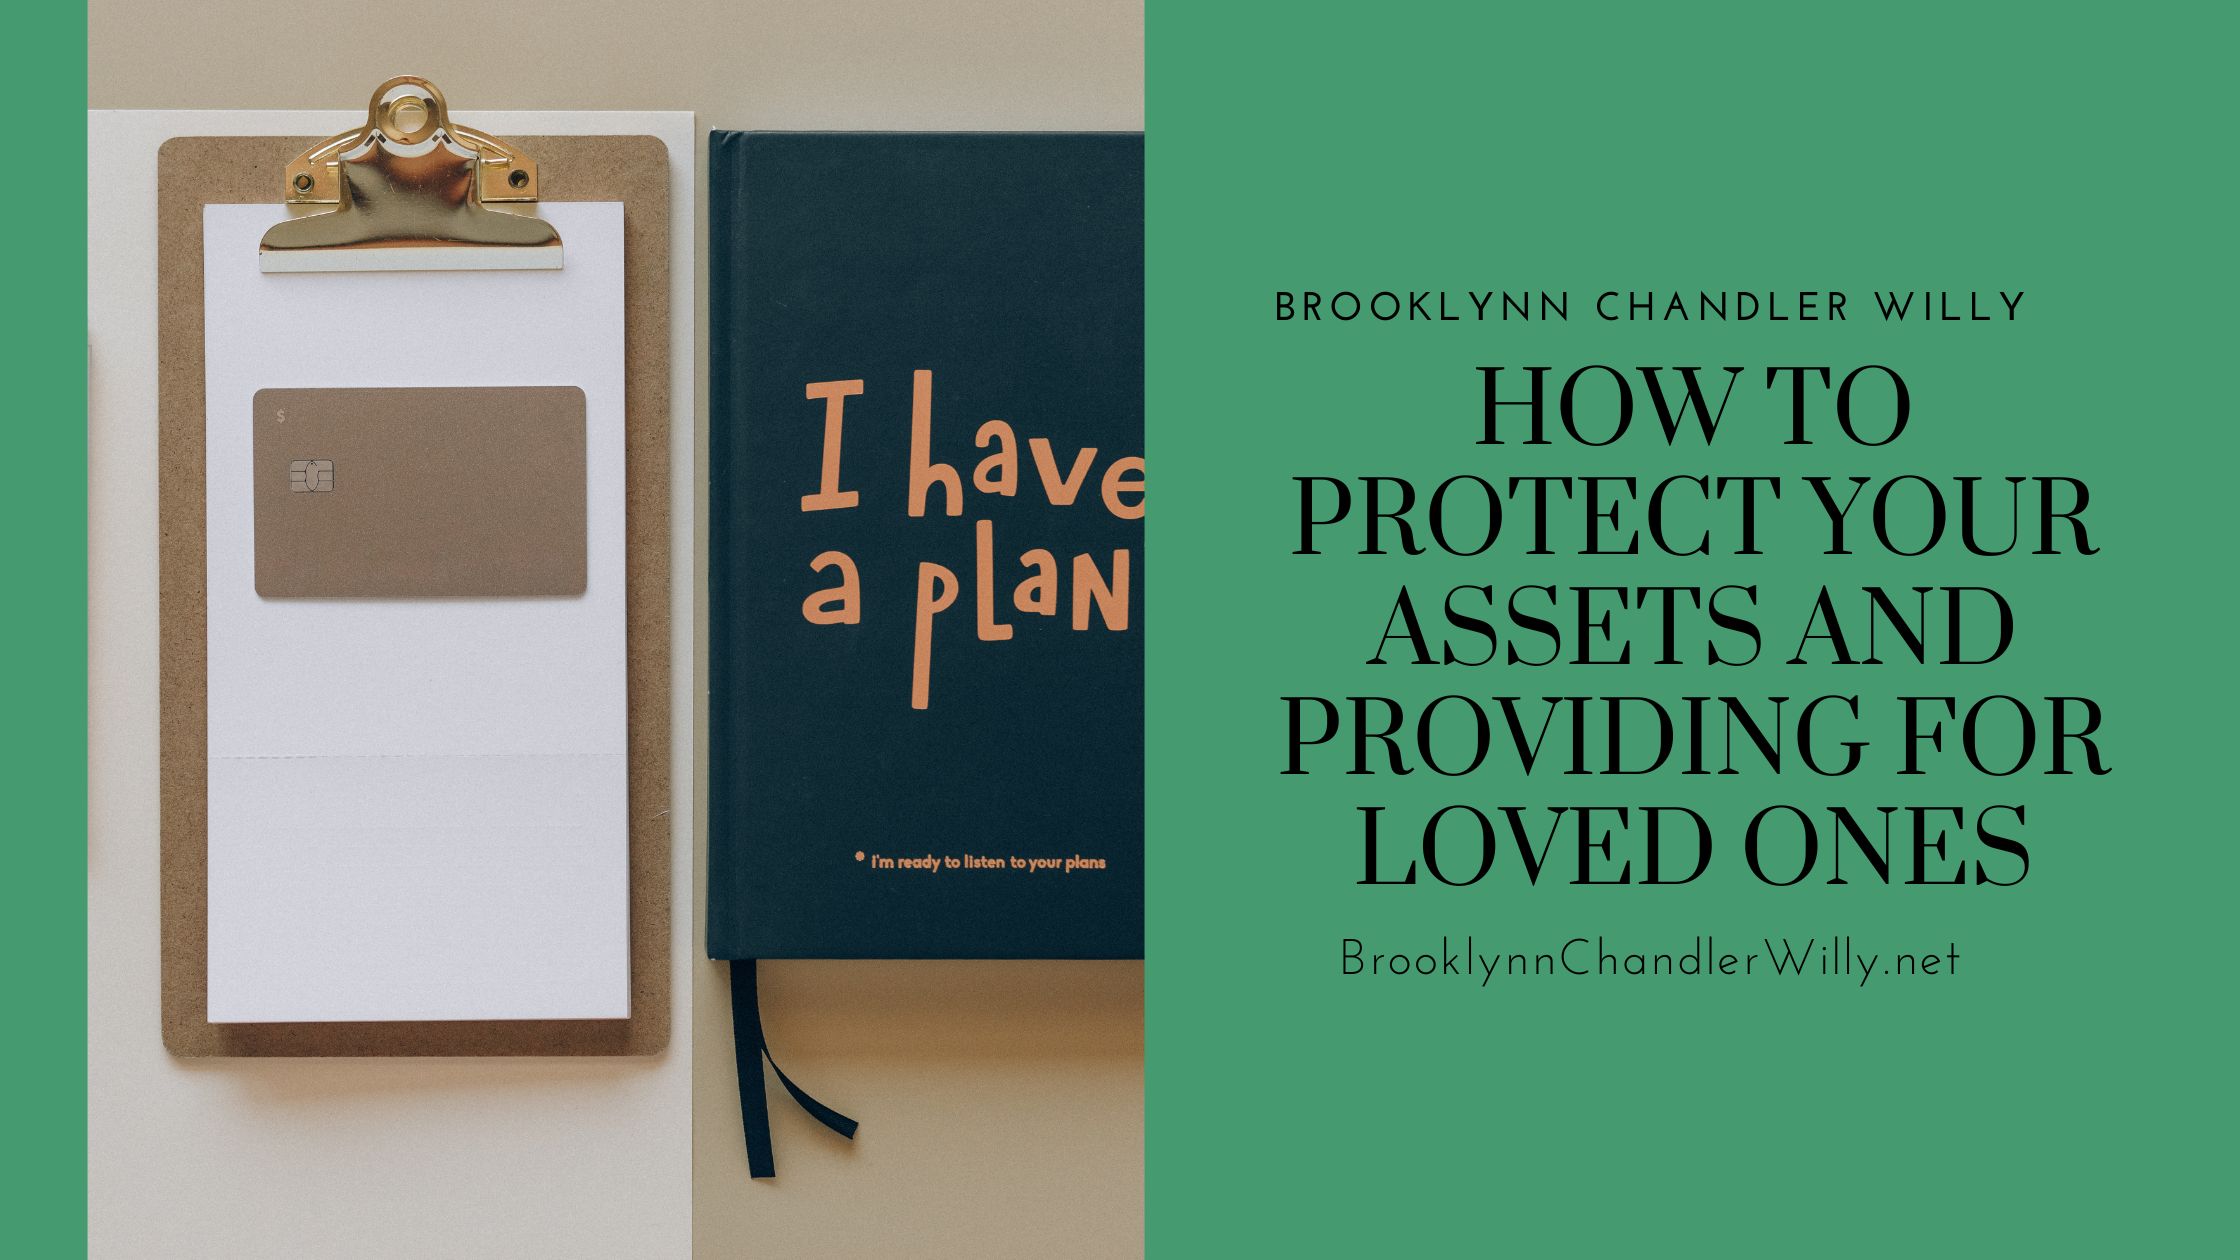 HOW TO
PROTECT YOUR
ASSETS AND
PROVIDING FOR
LOVED ONES

BrooklynnChandlerWilly.net